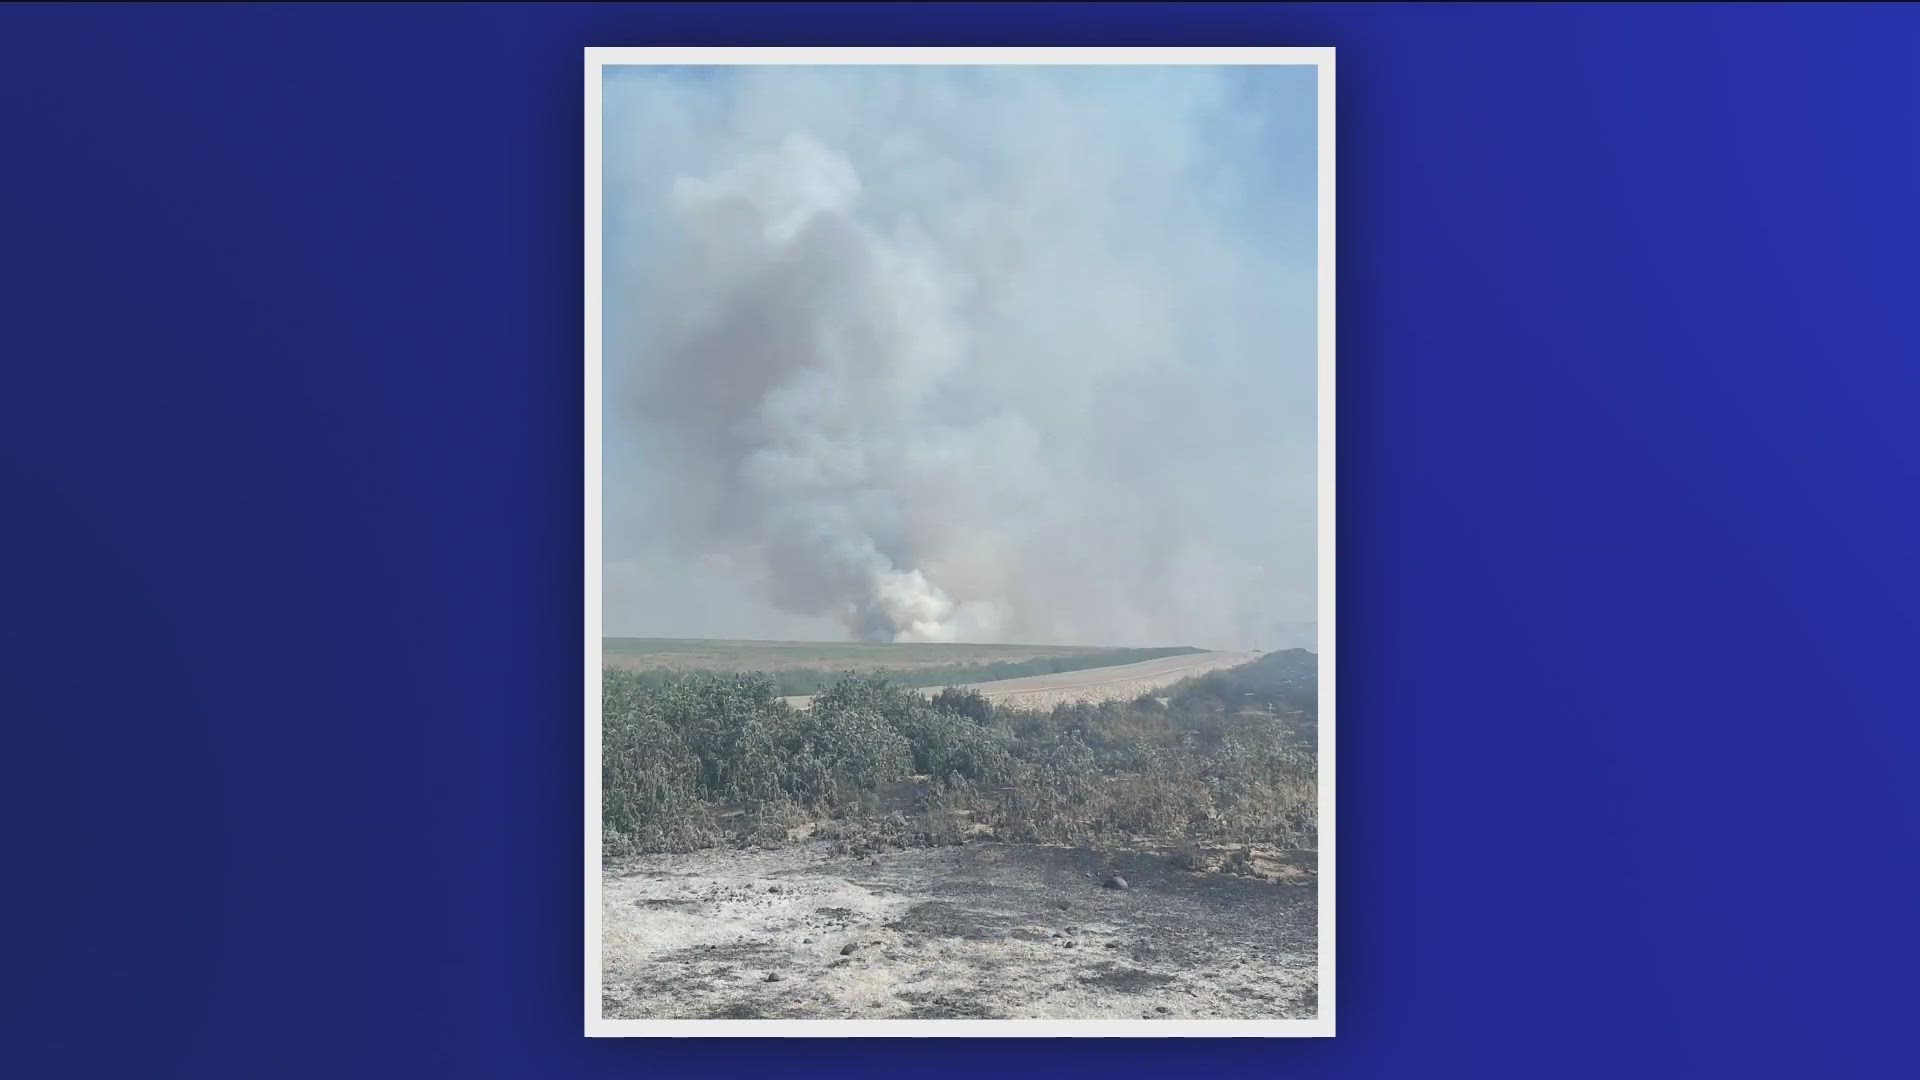 The Boise District BLM said the 'Southcoy Fire' burned roughly 150 acres Wednesday evening. Crews expect the fire to be controlled around 9 a.m. Thursday.